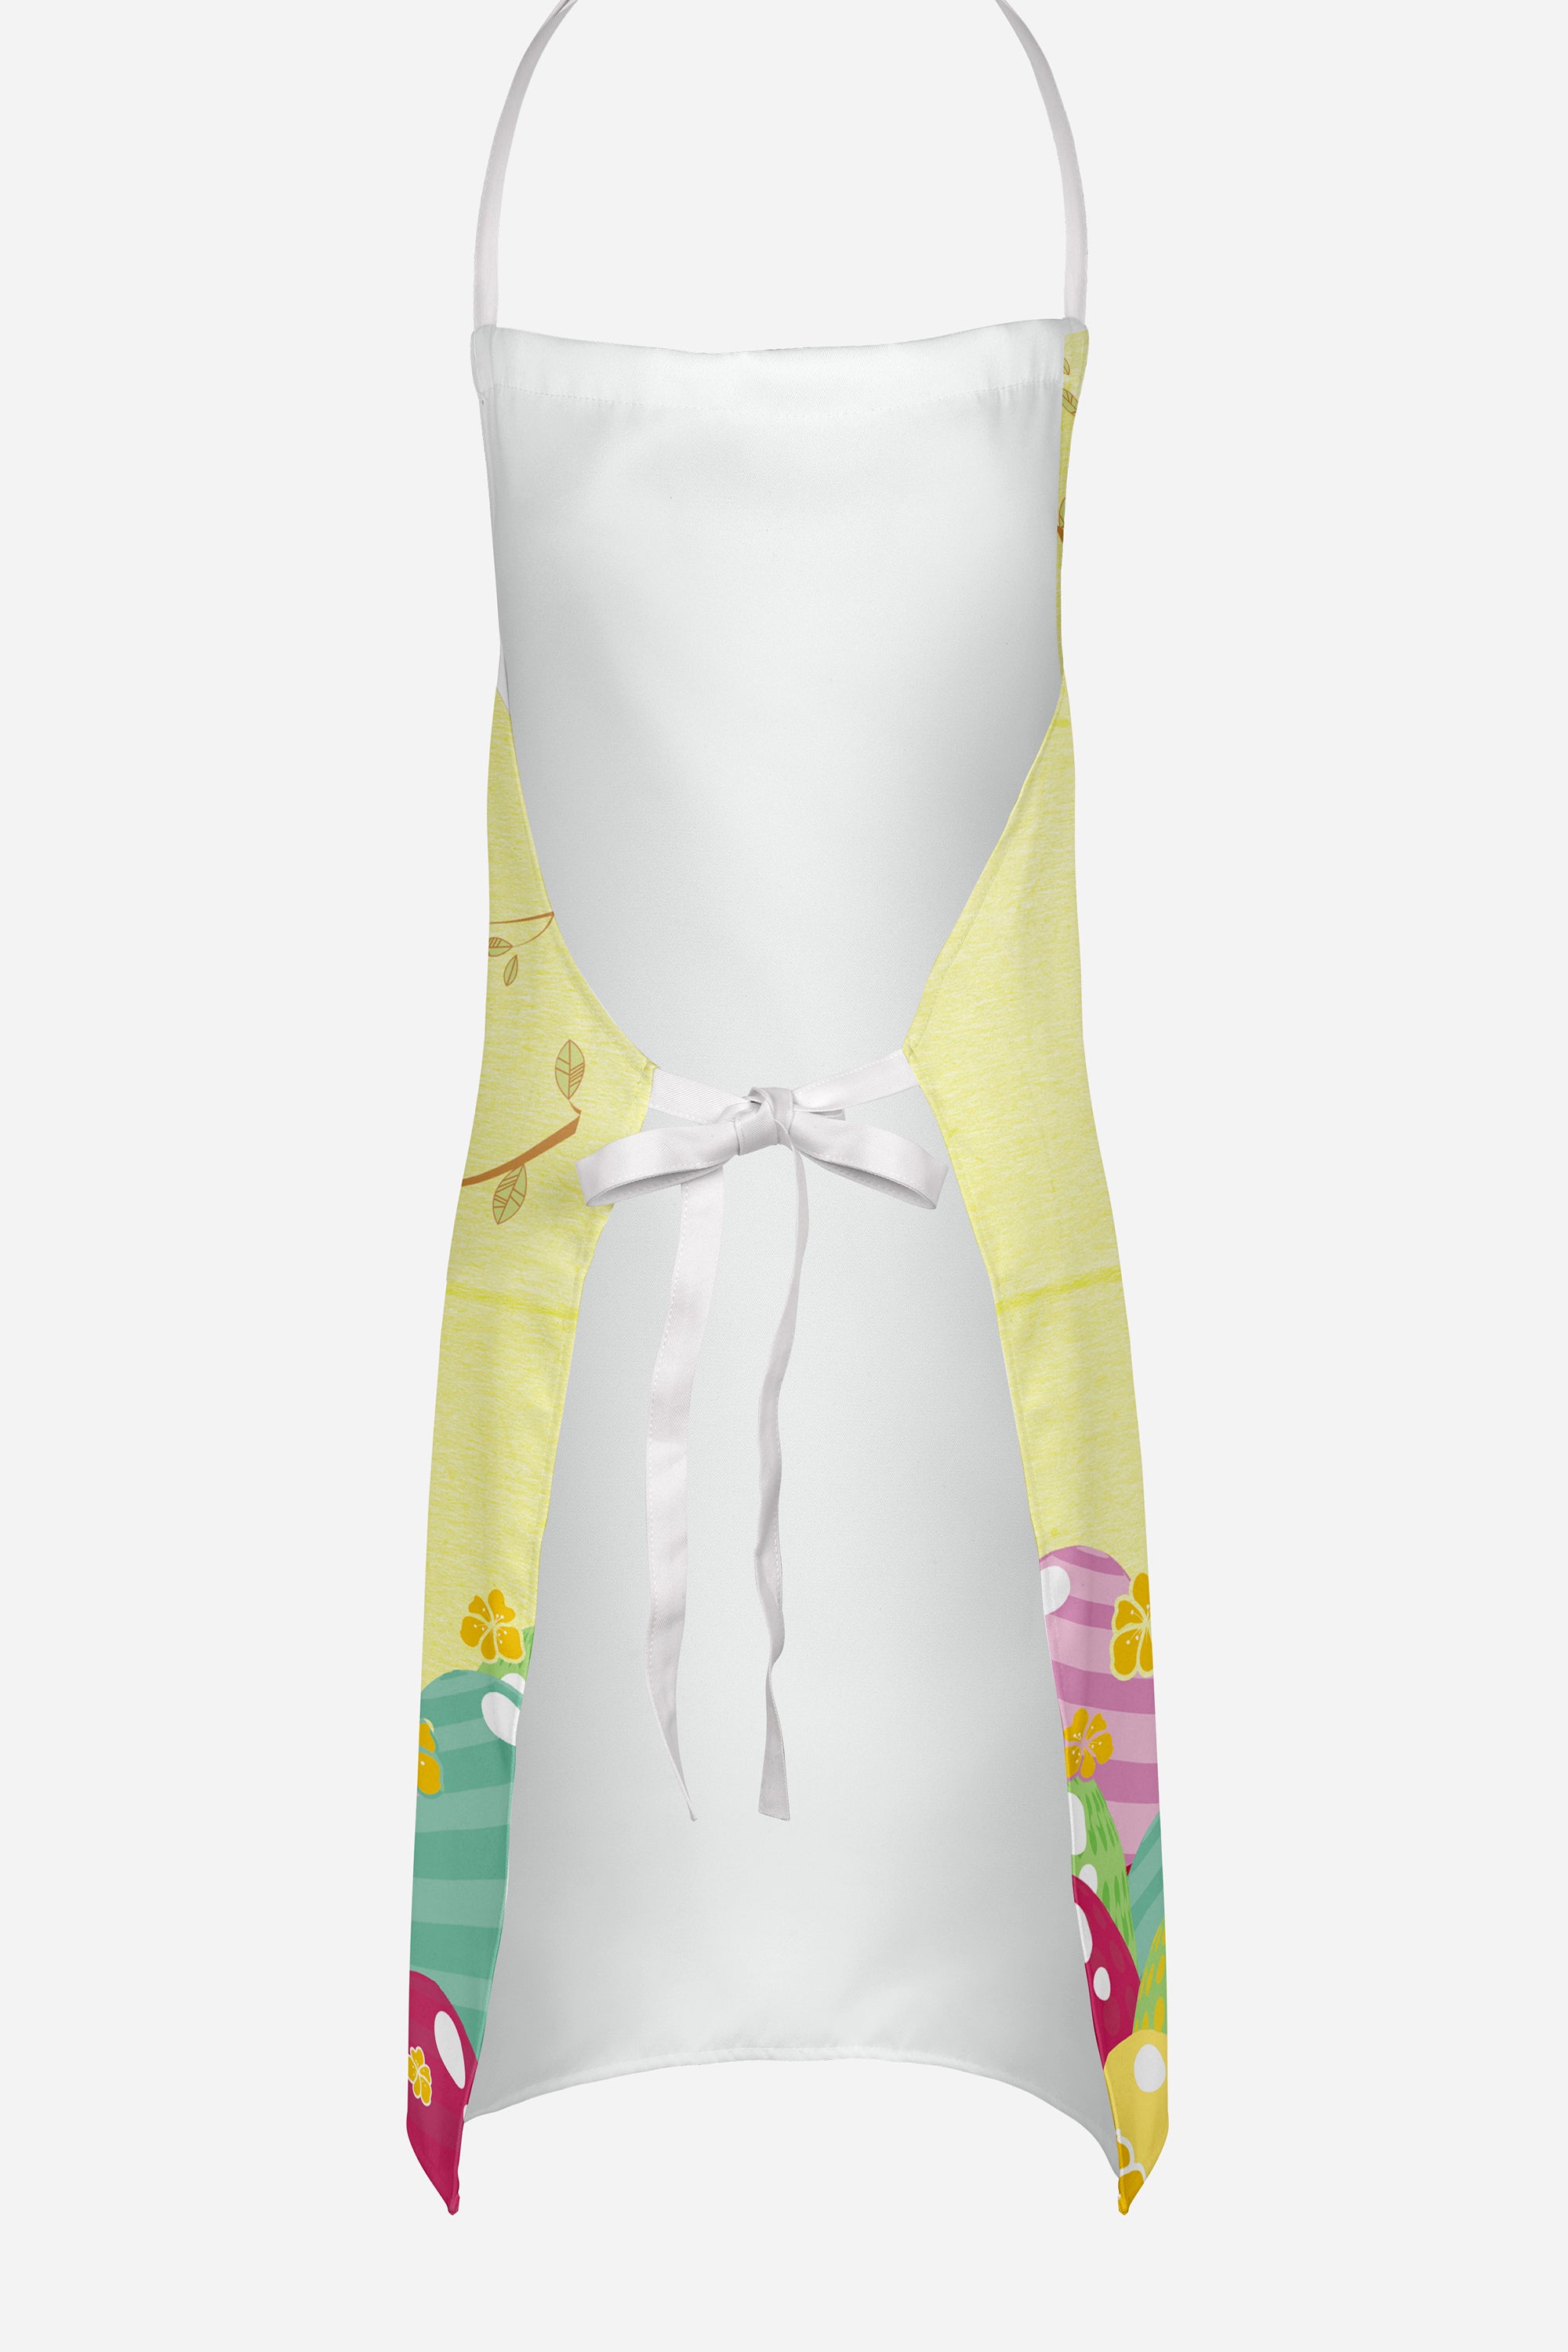 Easter Eggs Brittany Spaniel Apron BB6072APRON  the-store.com.